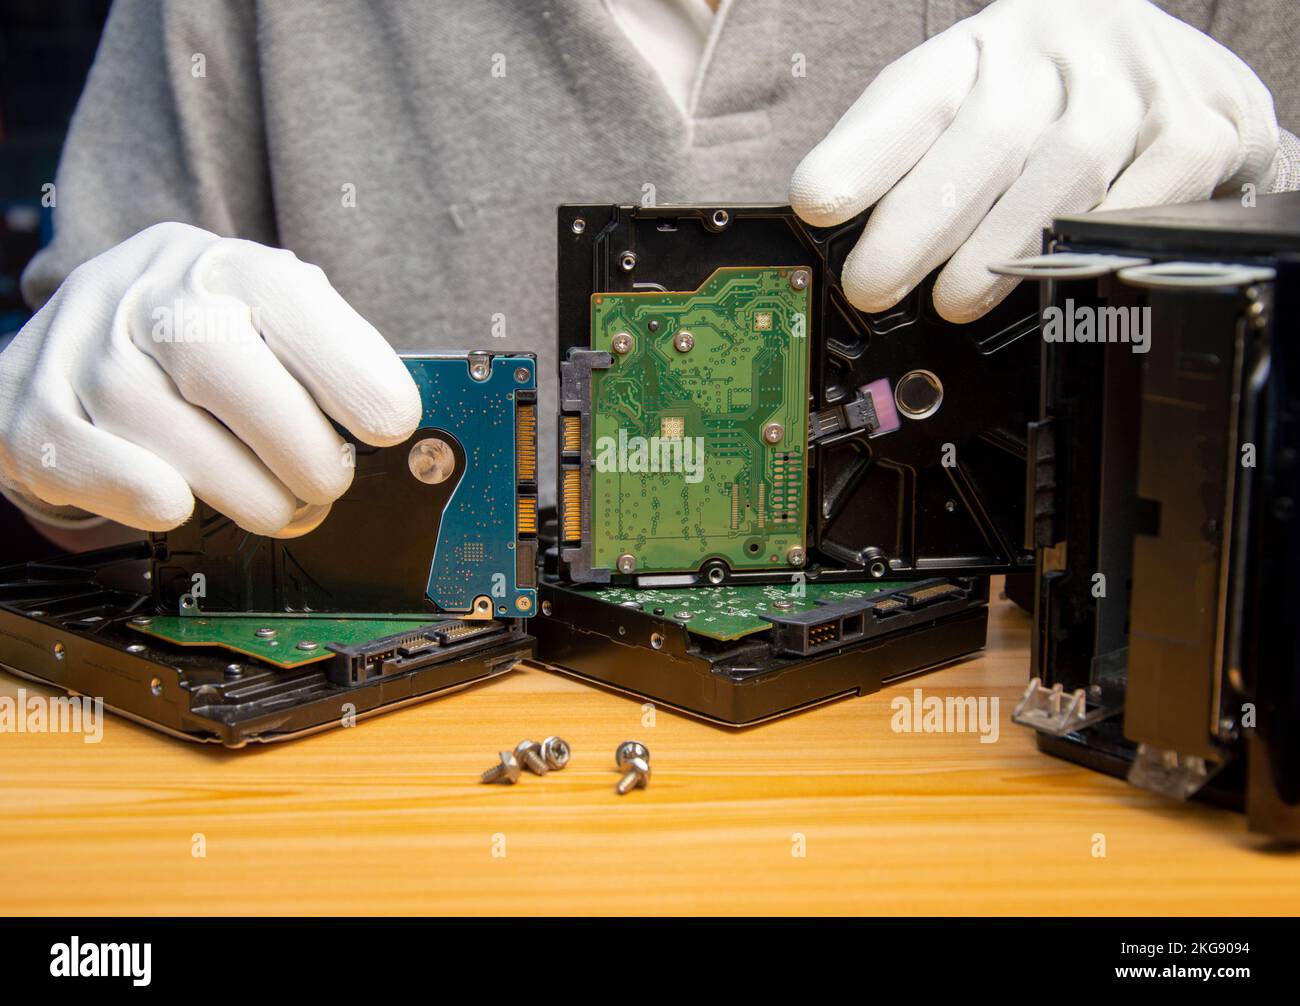 Rotating hard drives are still popular in use today, the technician is holding a hard drive in hand. Stock Photo